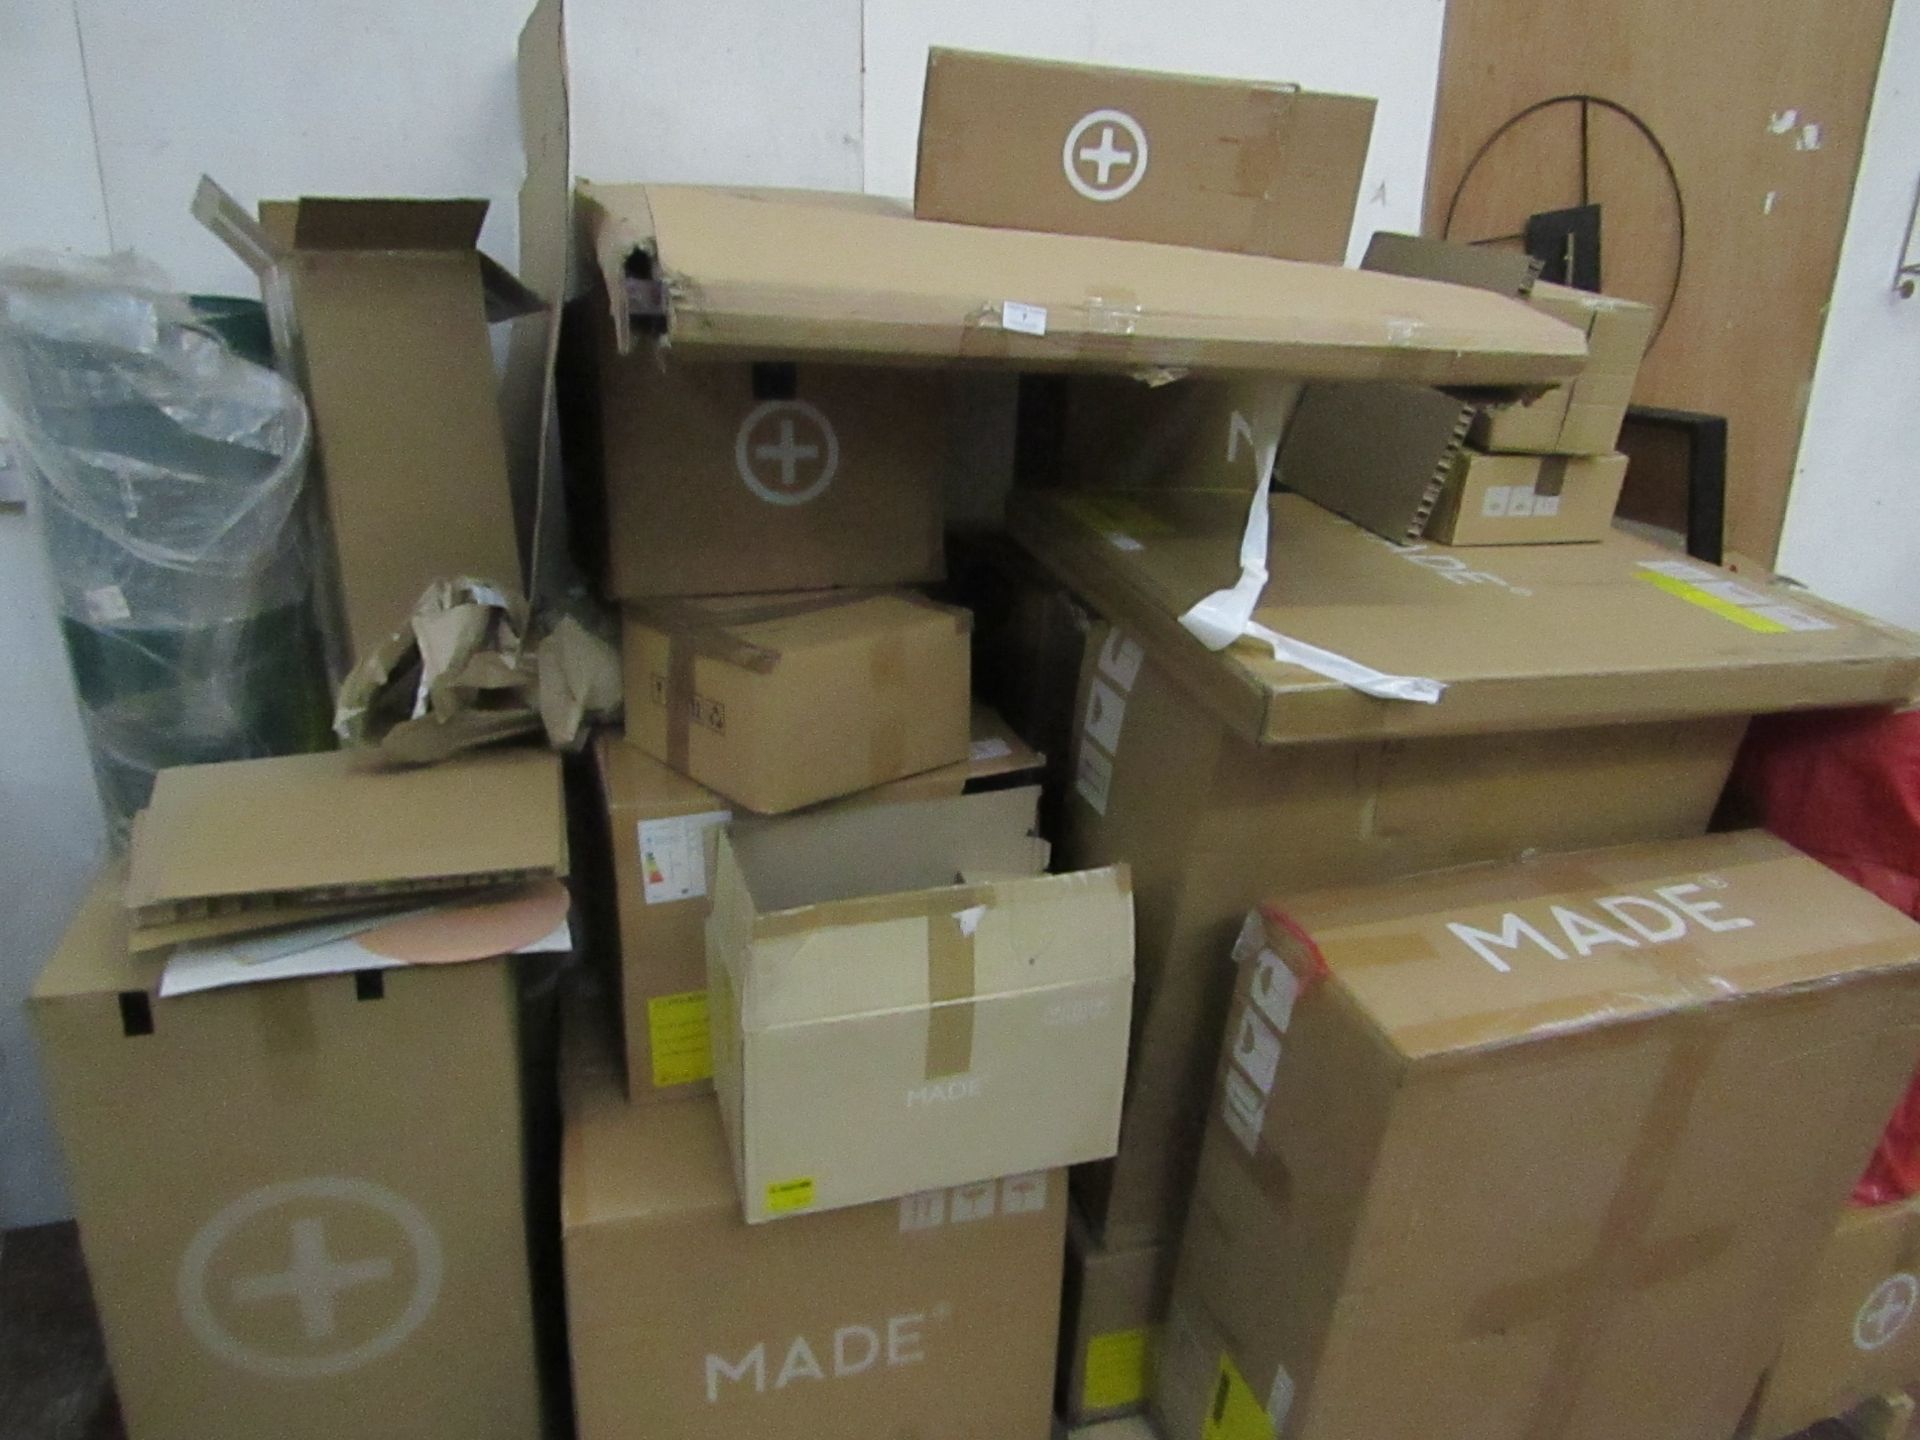 | 2X | PALLETS OF MADE.COM ITEMS ALL OF WHICH ARE EITHER DAMAGED OR MISSING PARTS |